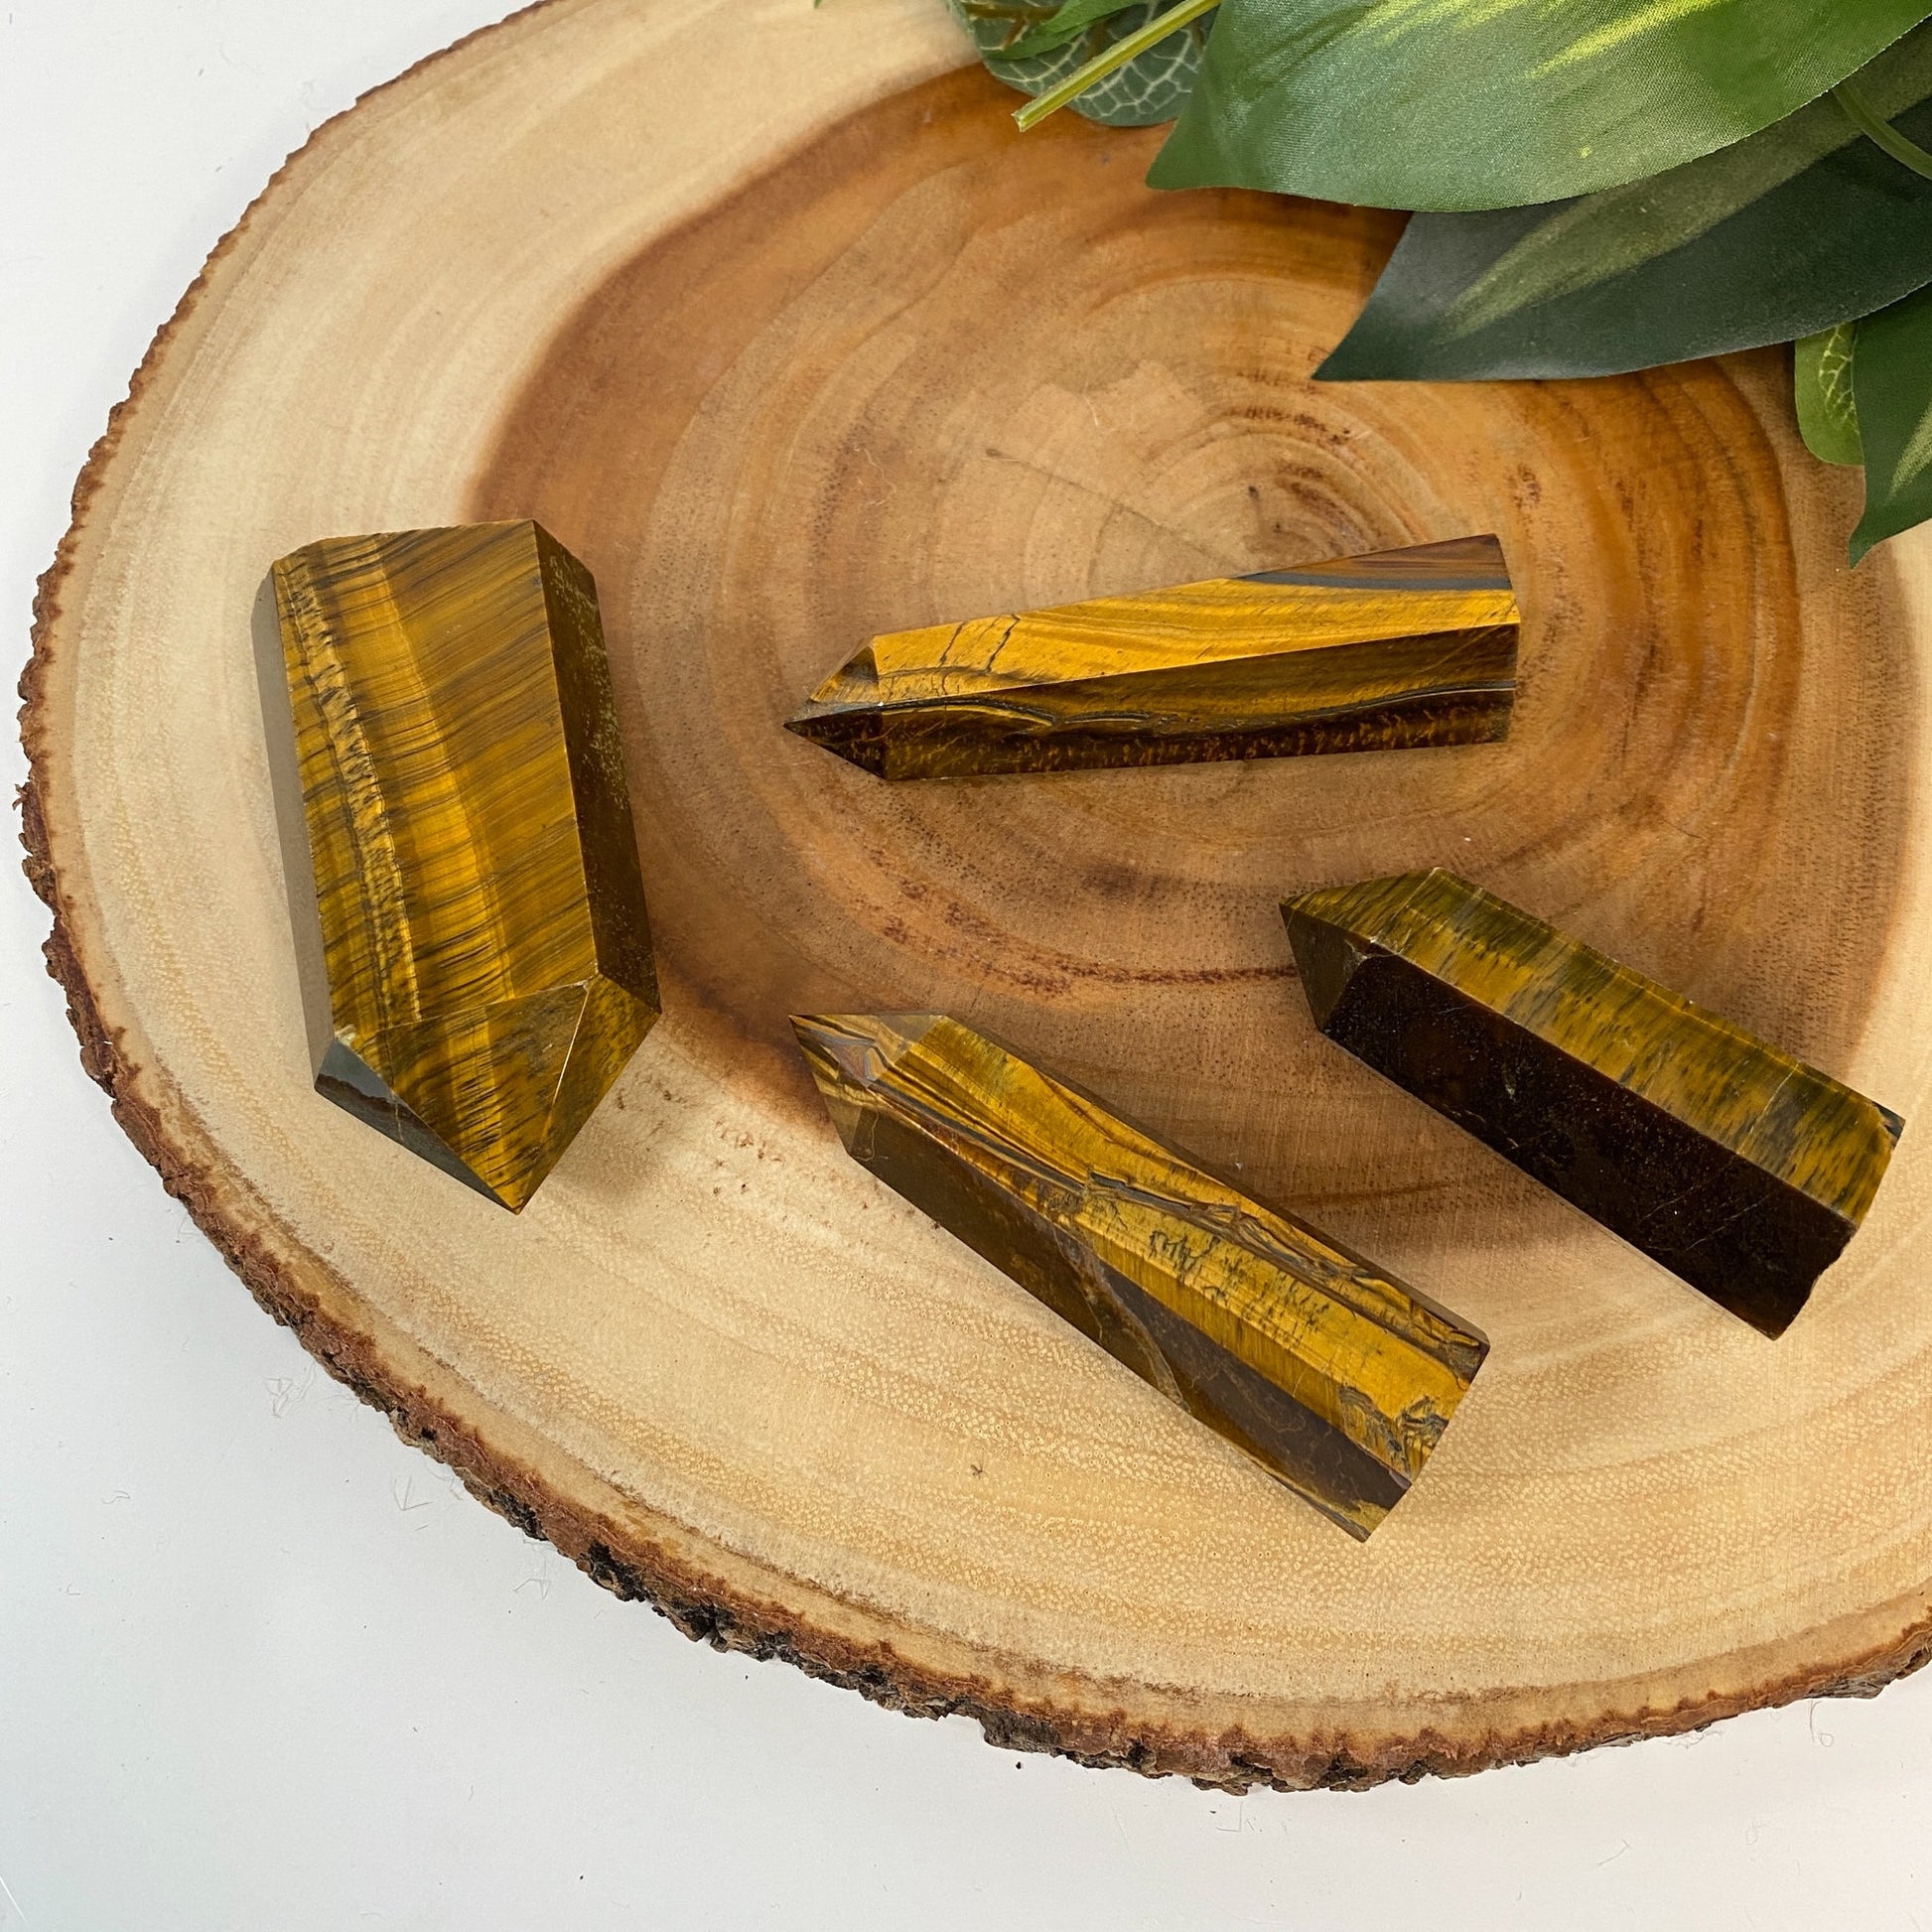 Natural Tigers Eye Tower Point from Africa - Flashy Yellow Crystal for Meditation, Crystal Grids, Healing, Reiki Chakra, Altars, Wand